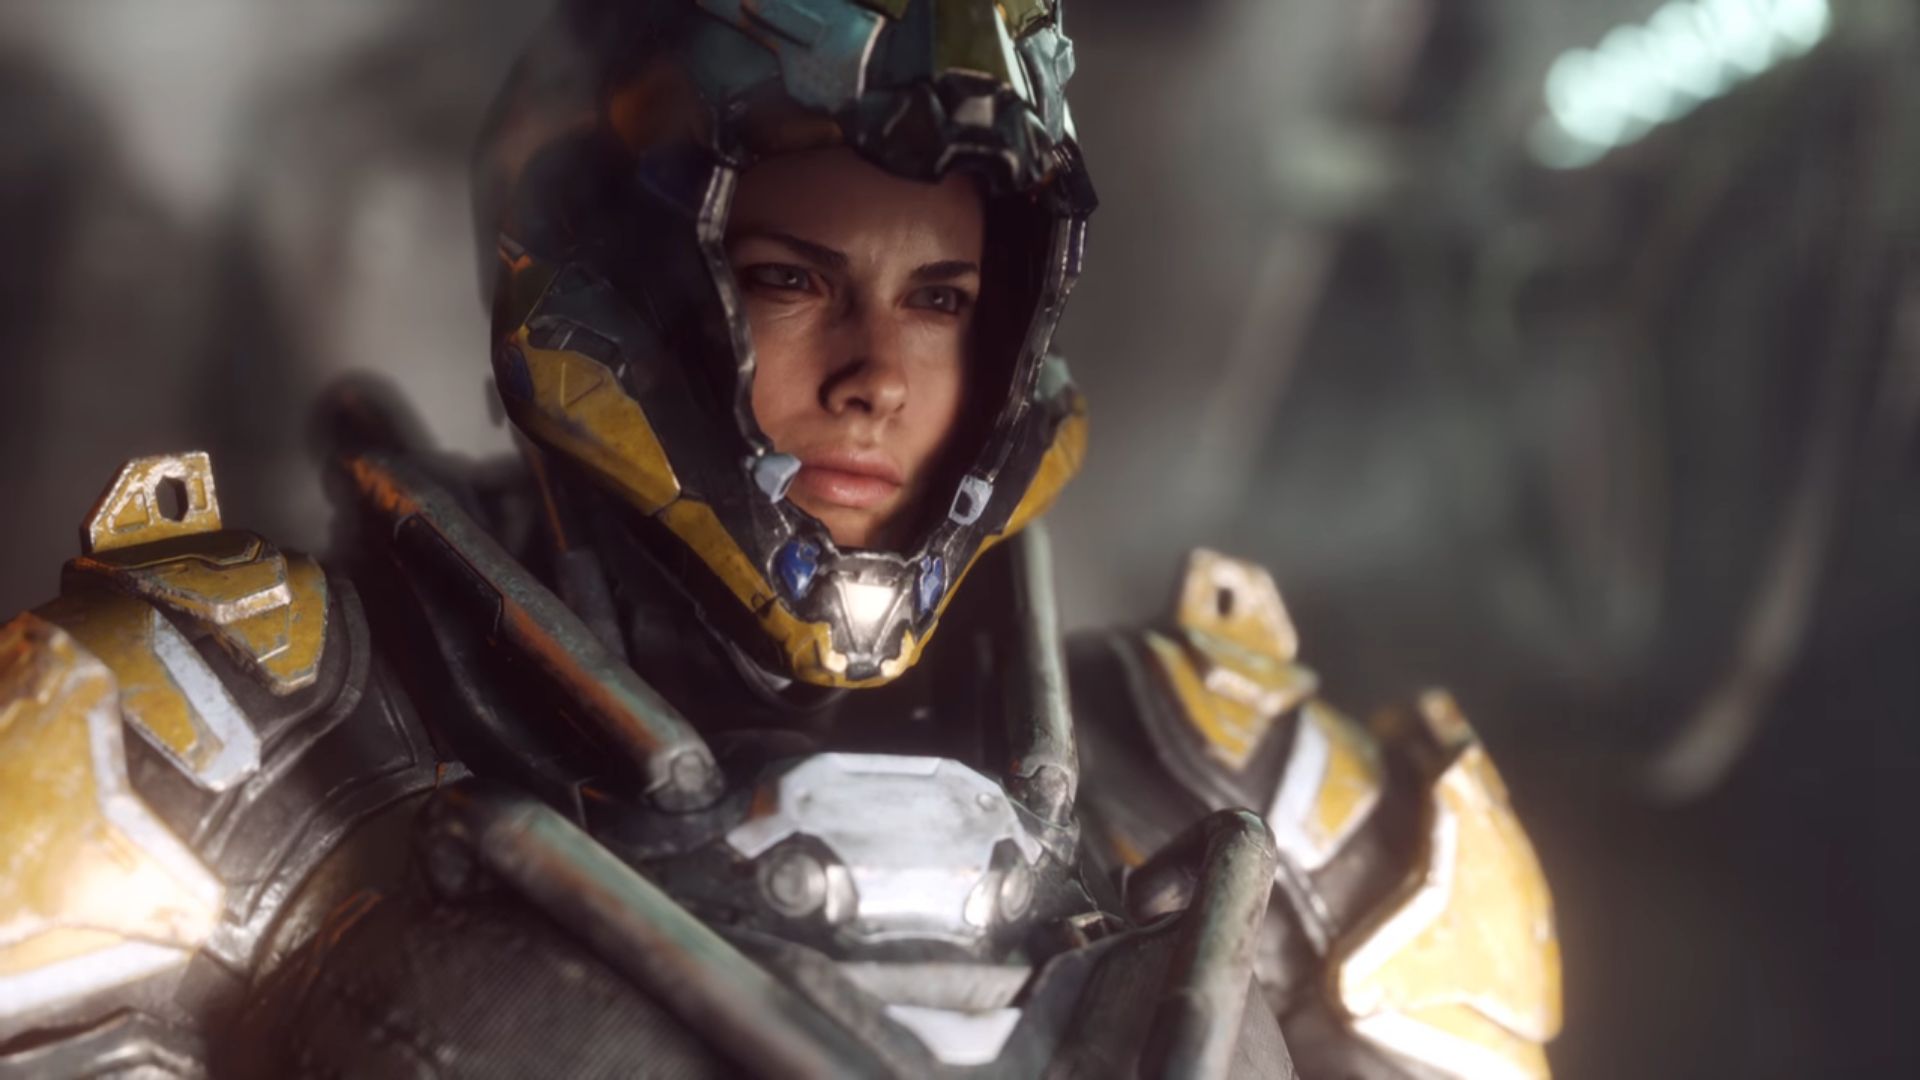 Image for Anthem pushed to early 2019, next Dragon Age was to have “live” elements, SWTOR's future "up in the air" - report